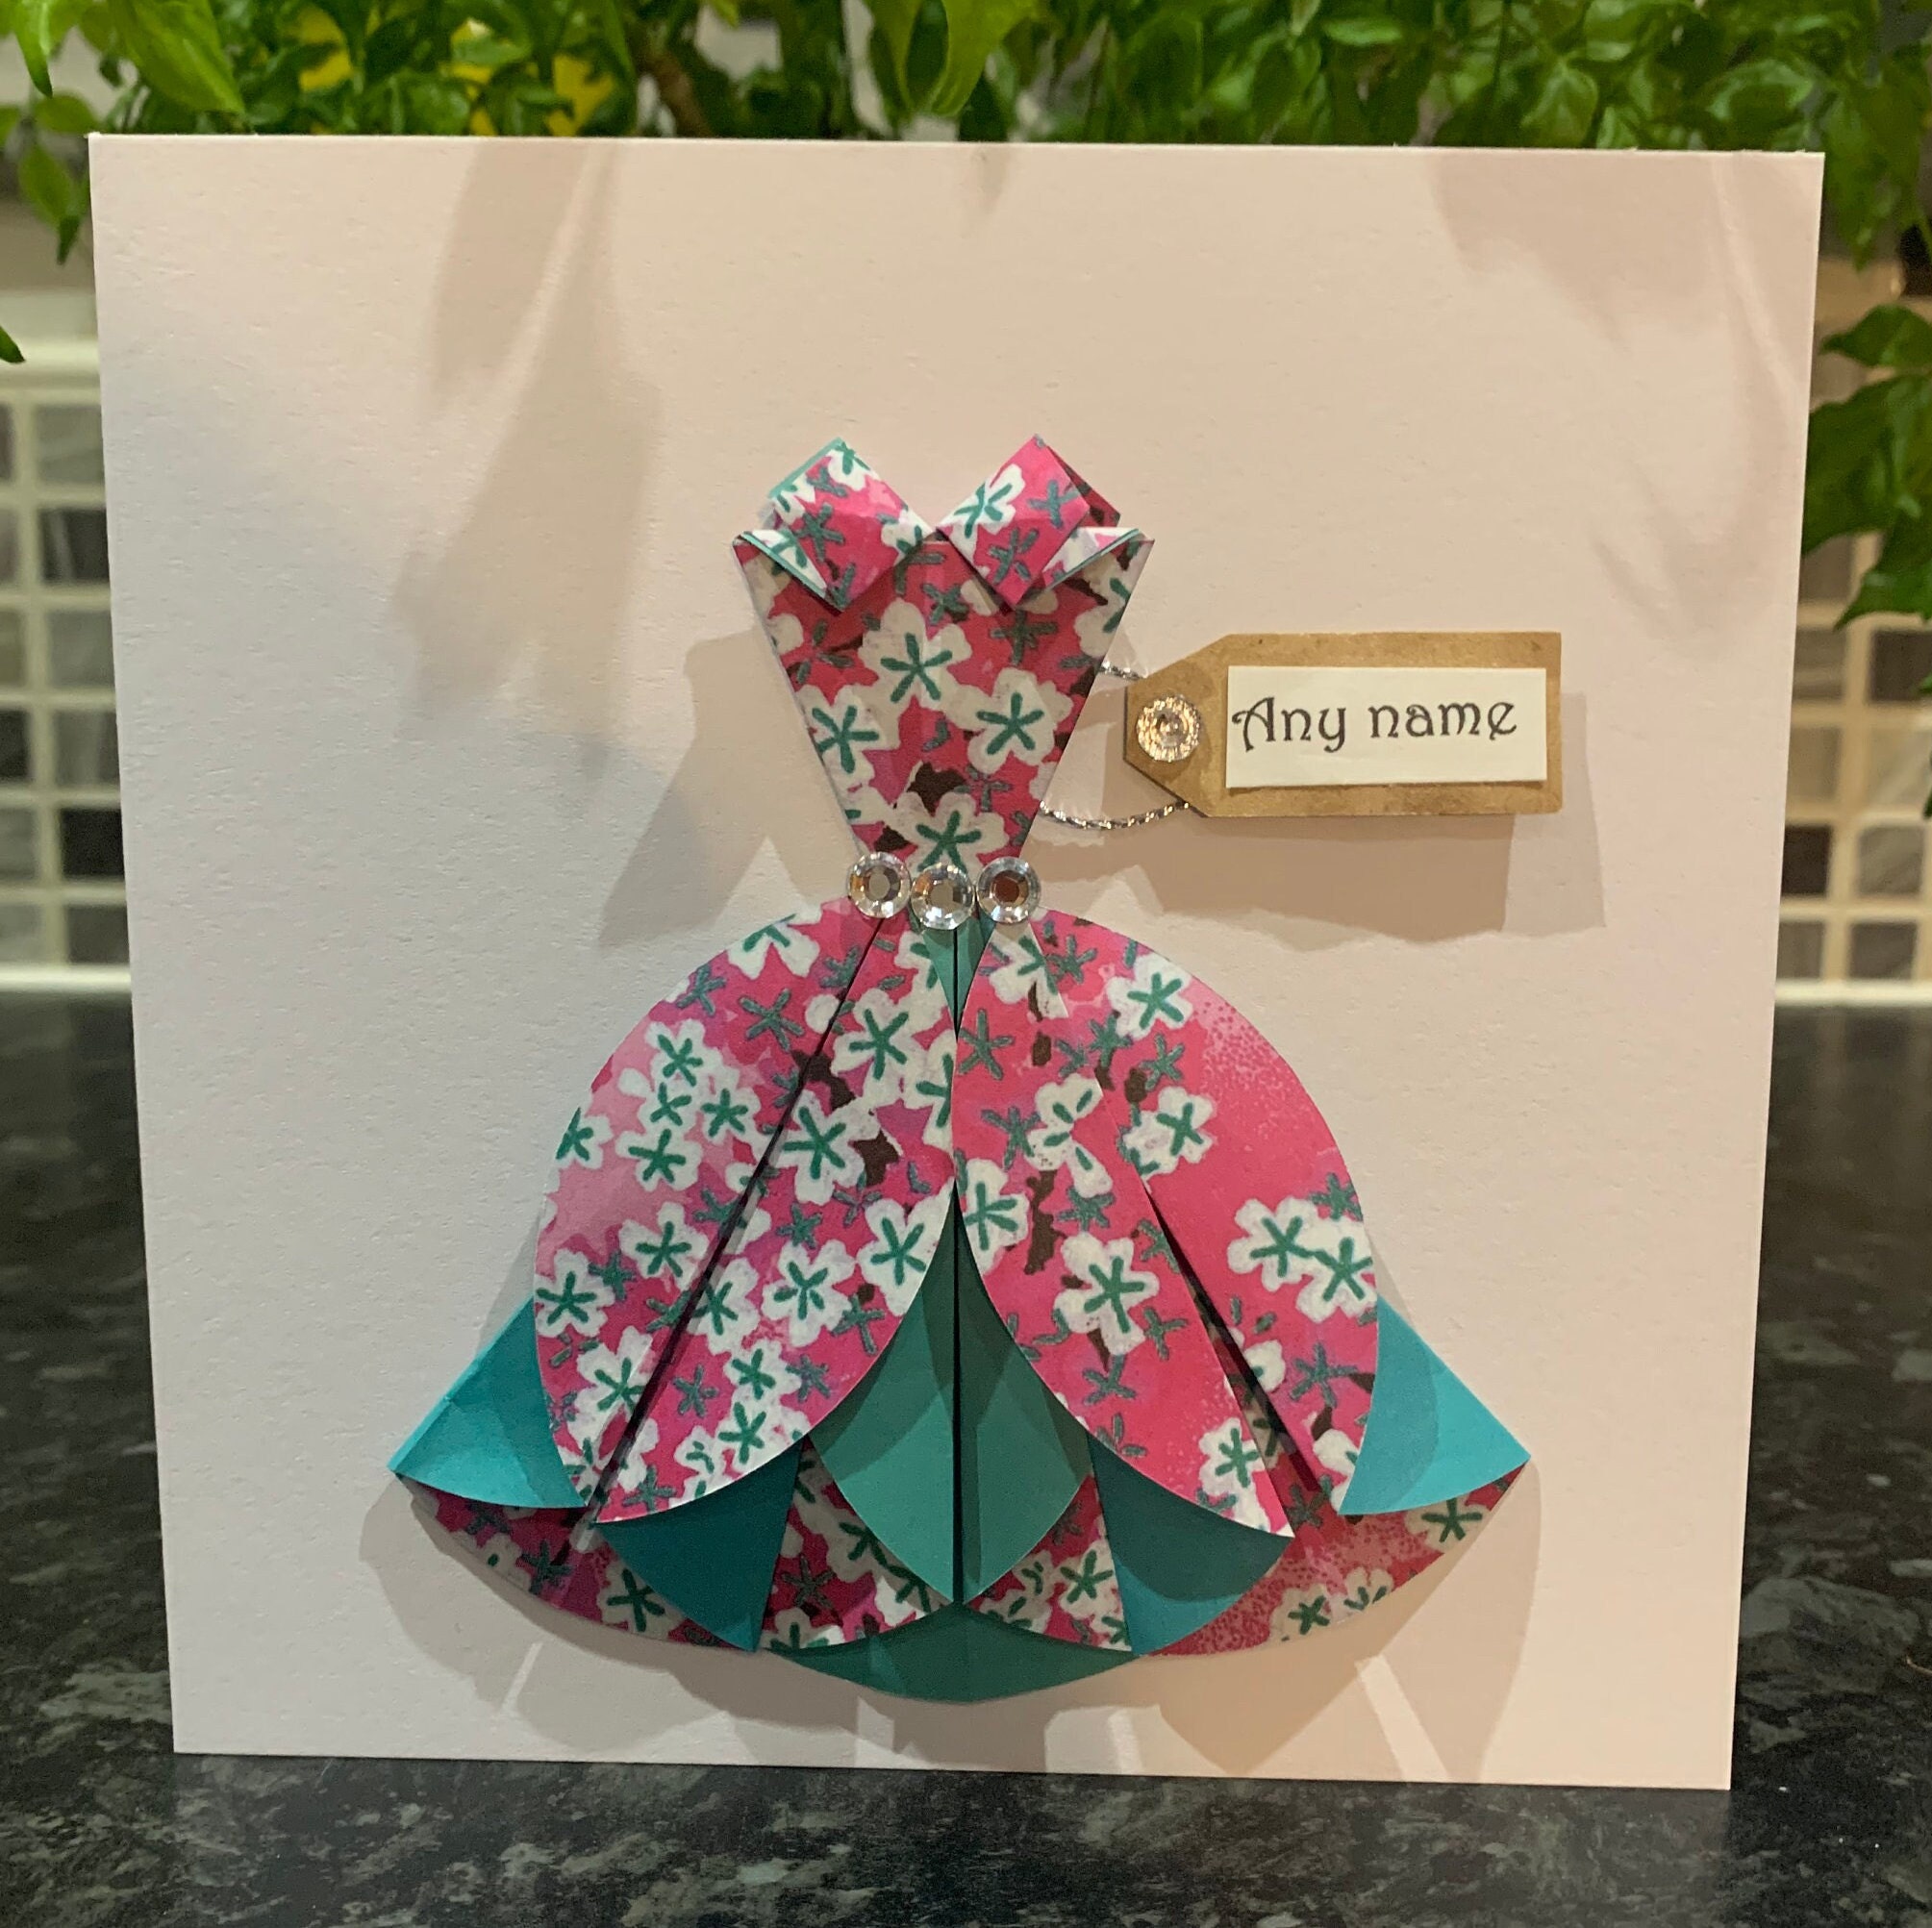 Personalised Handmade Origami Dress Card For Her | Etsy